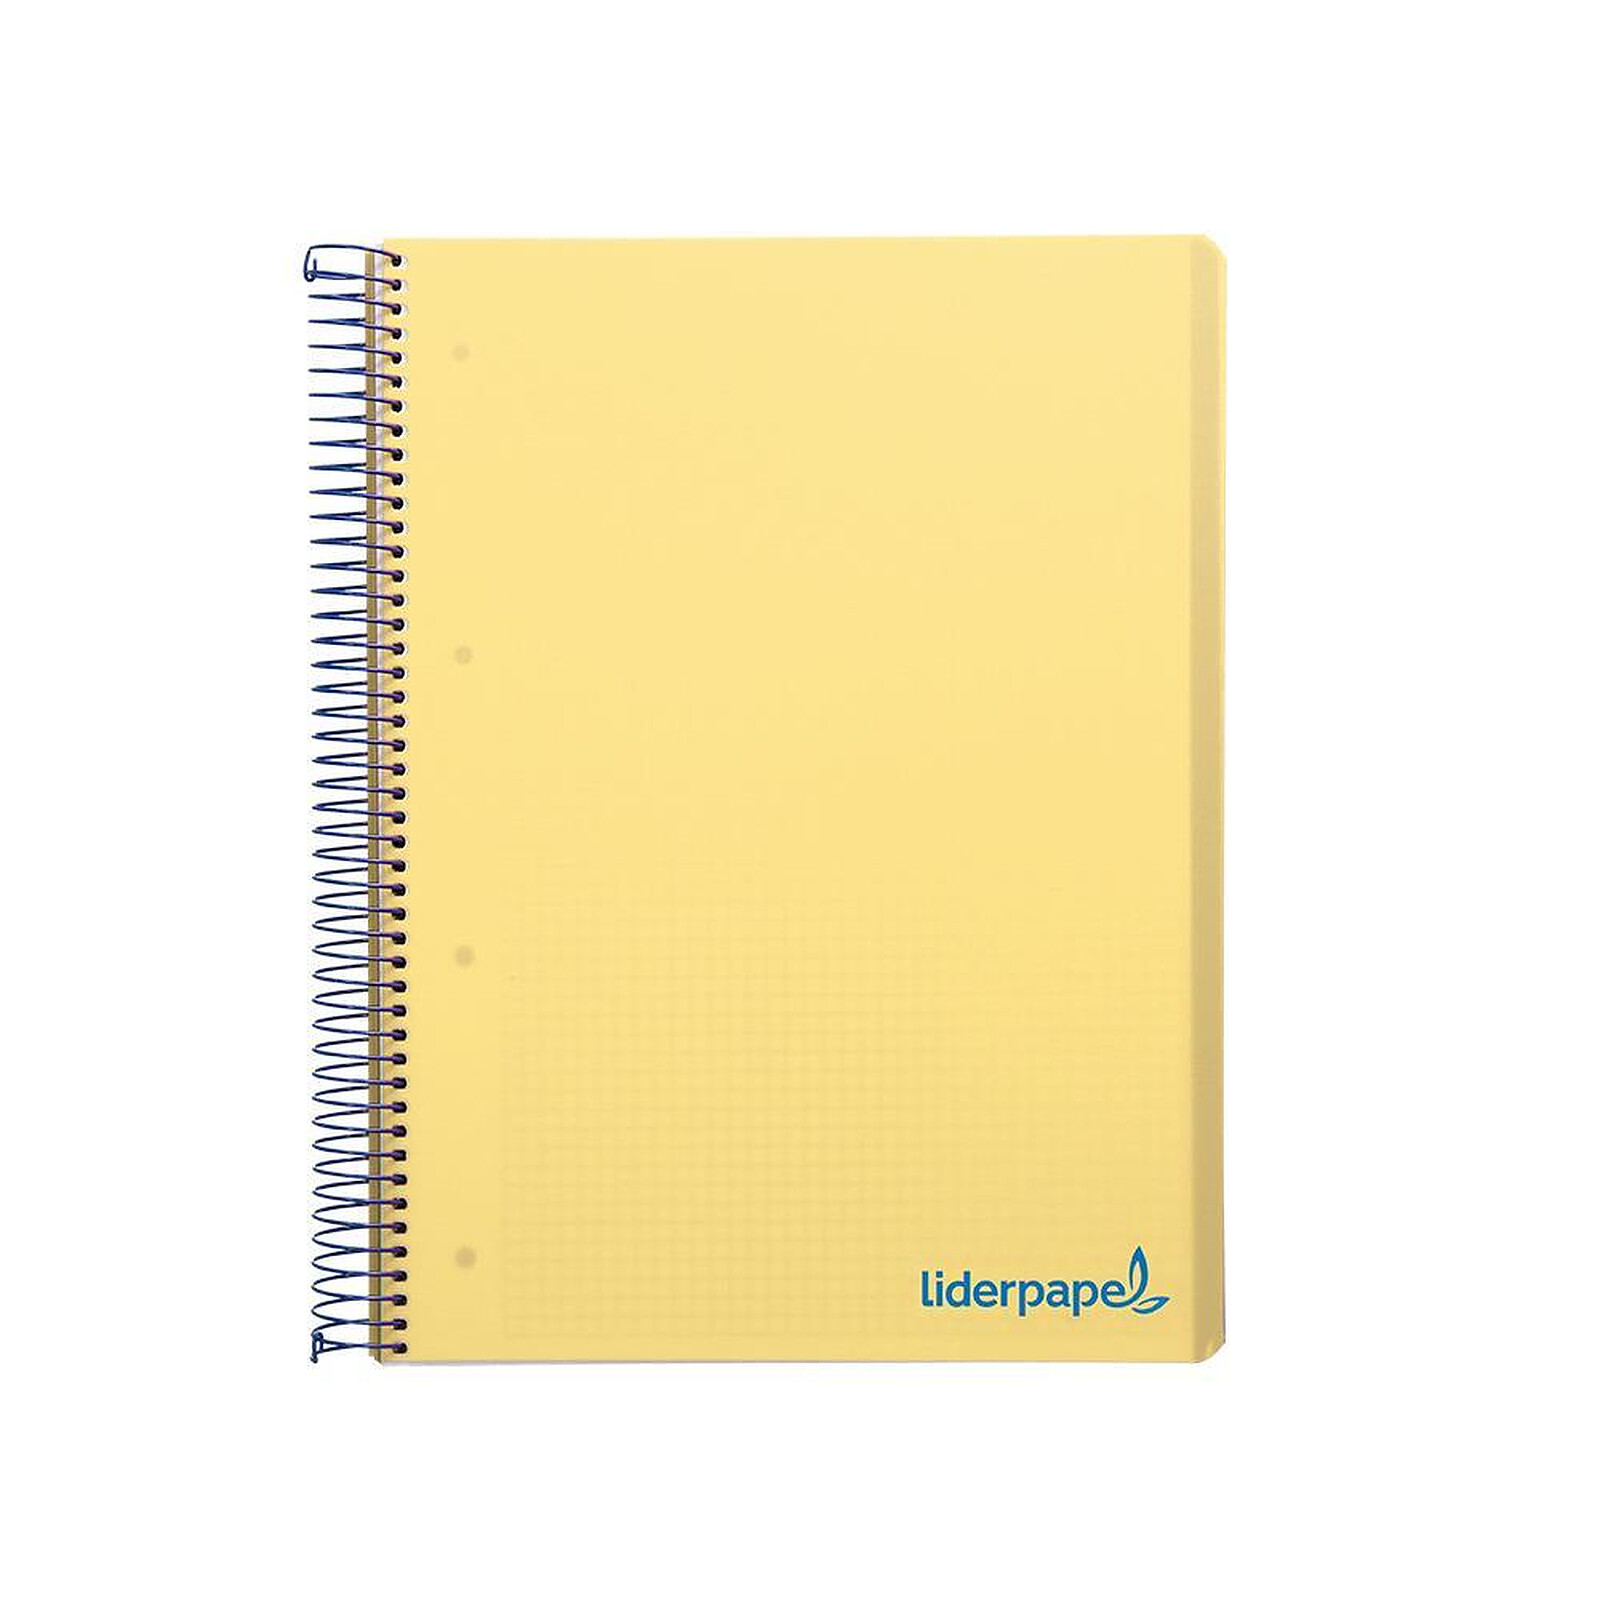 LIDERPAPEL Cahier spirale A4 micro wonder 240 pages 90g 4 trous 5